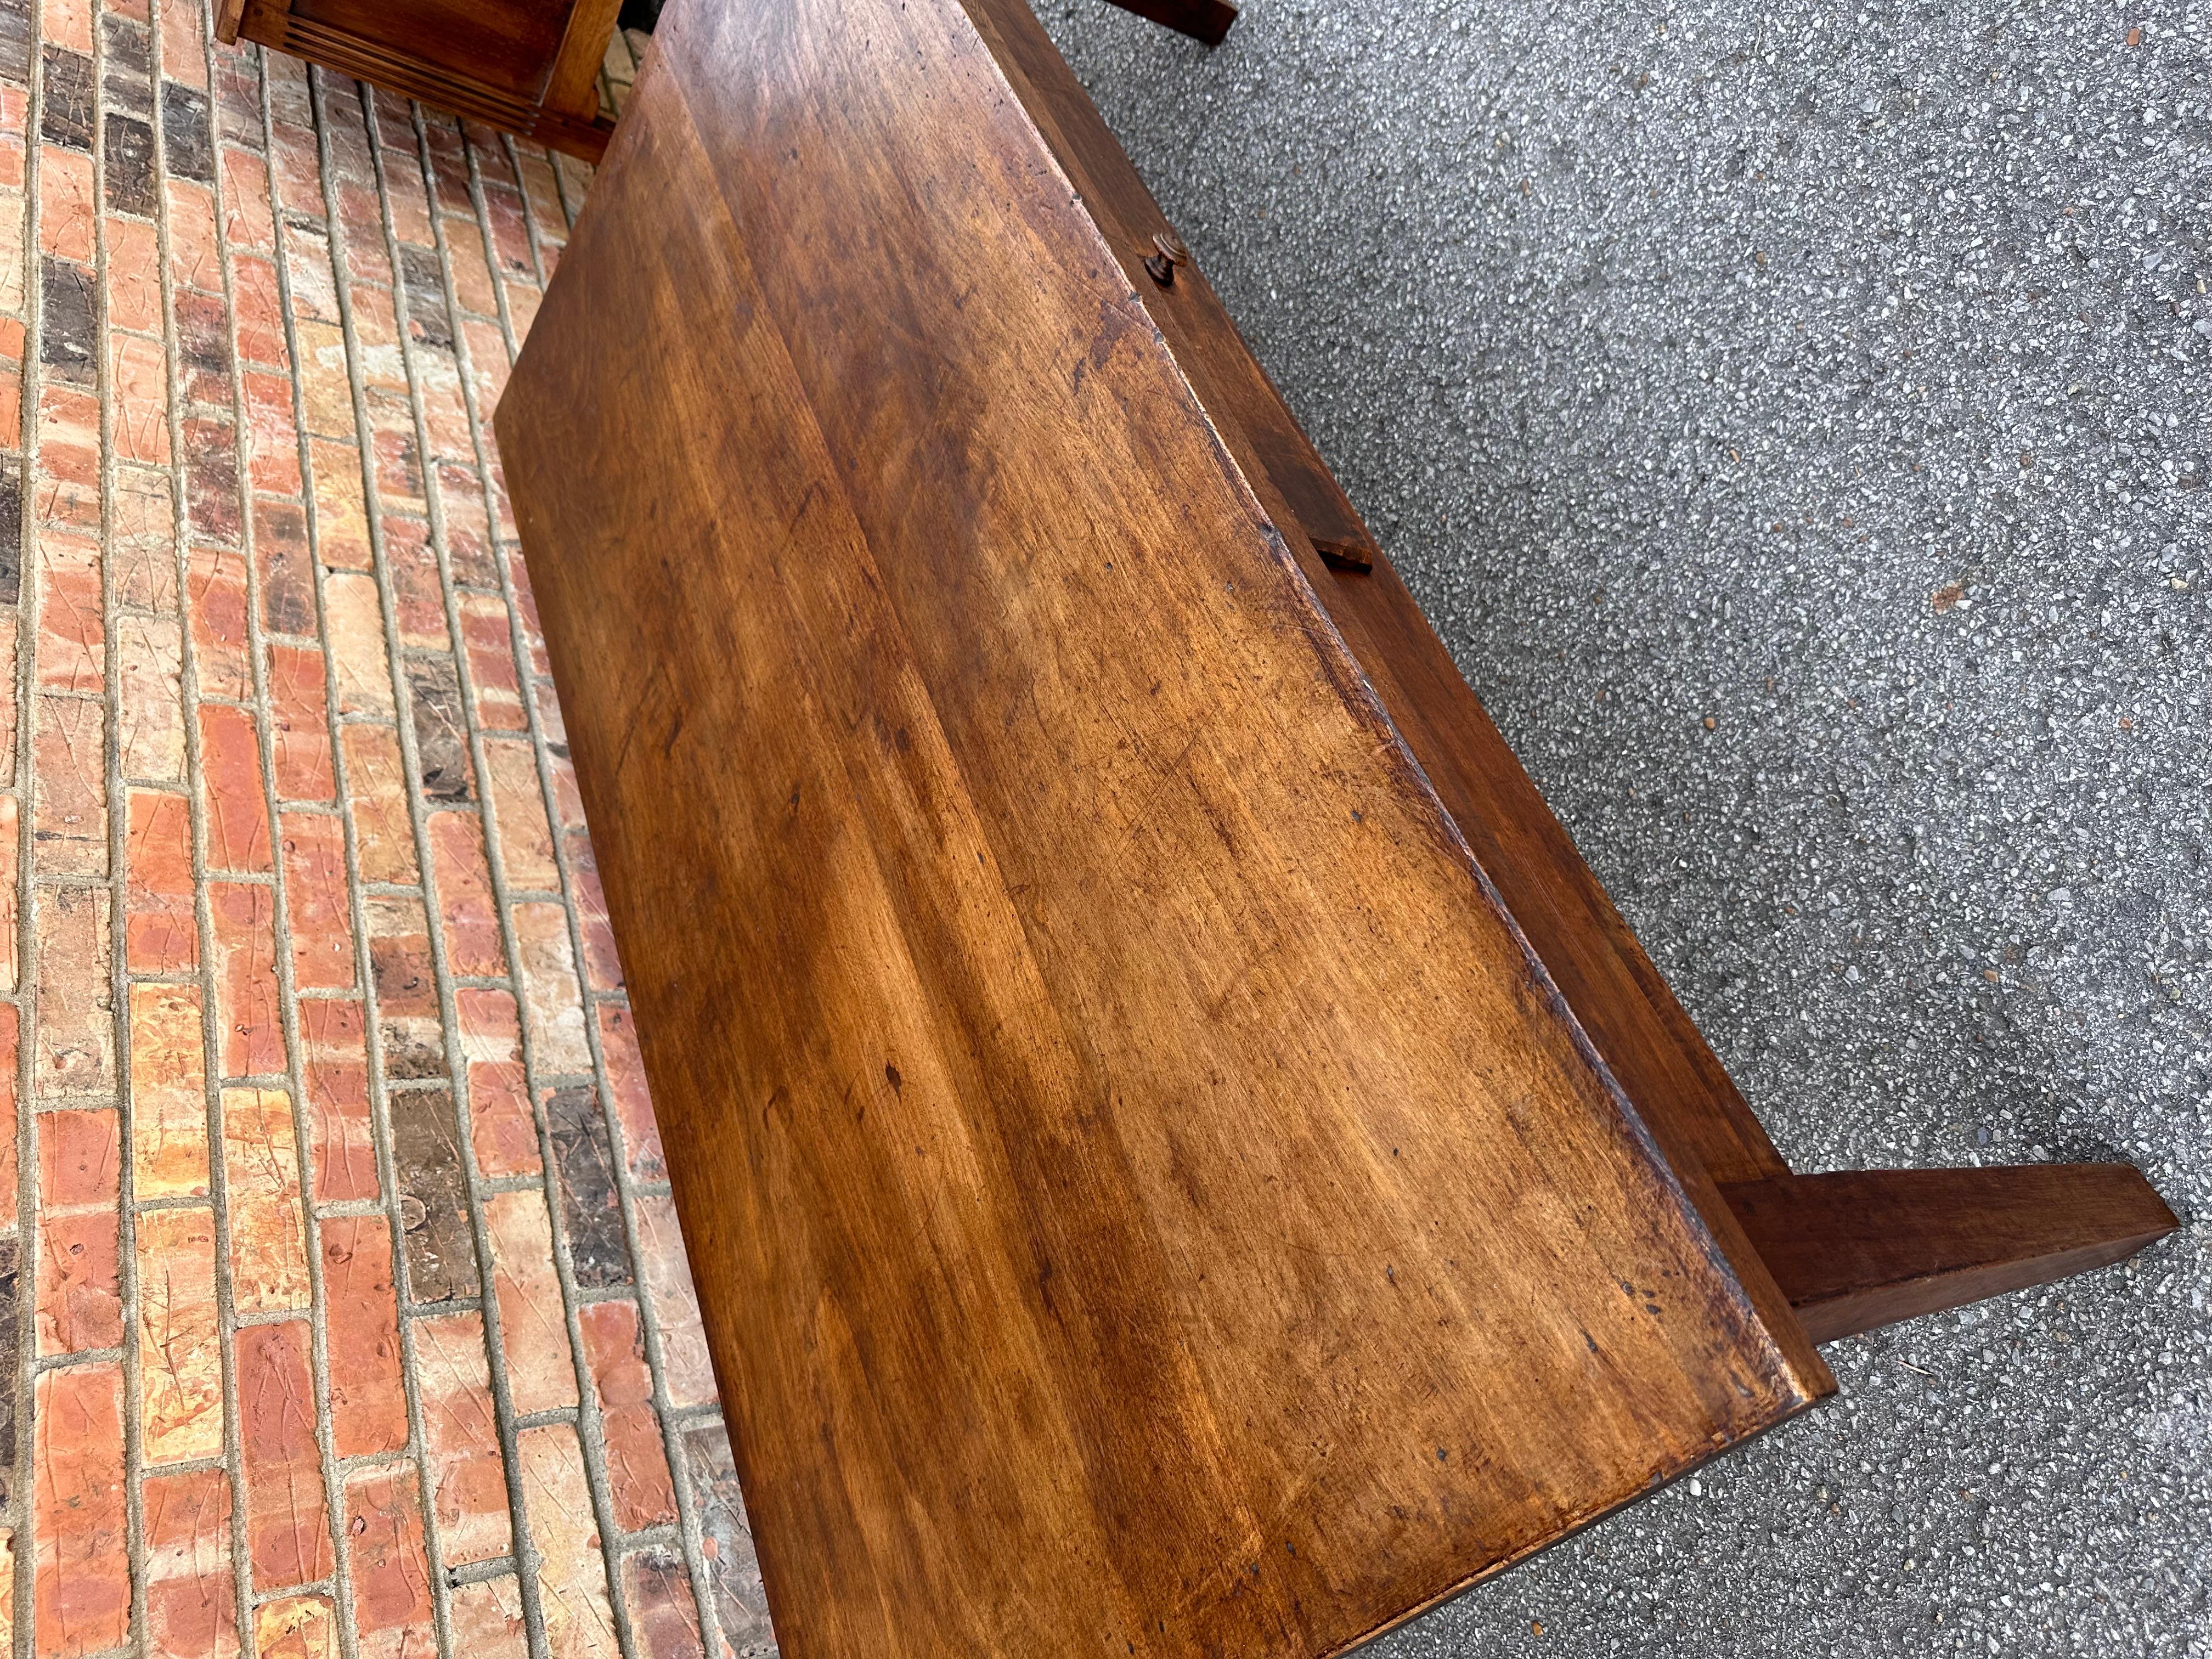 This is a beautiful mid 19th century French coffee table. The walnut wood gives it a nice warm tone and with such amazing patina. A single drawer to hold all the remotes we have to deal with these days. These tables are virtually indestructible